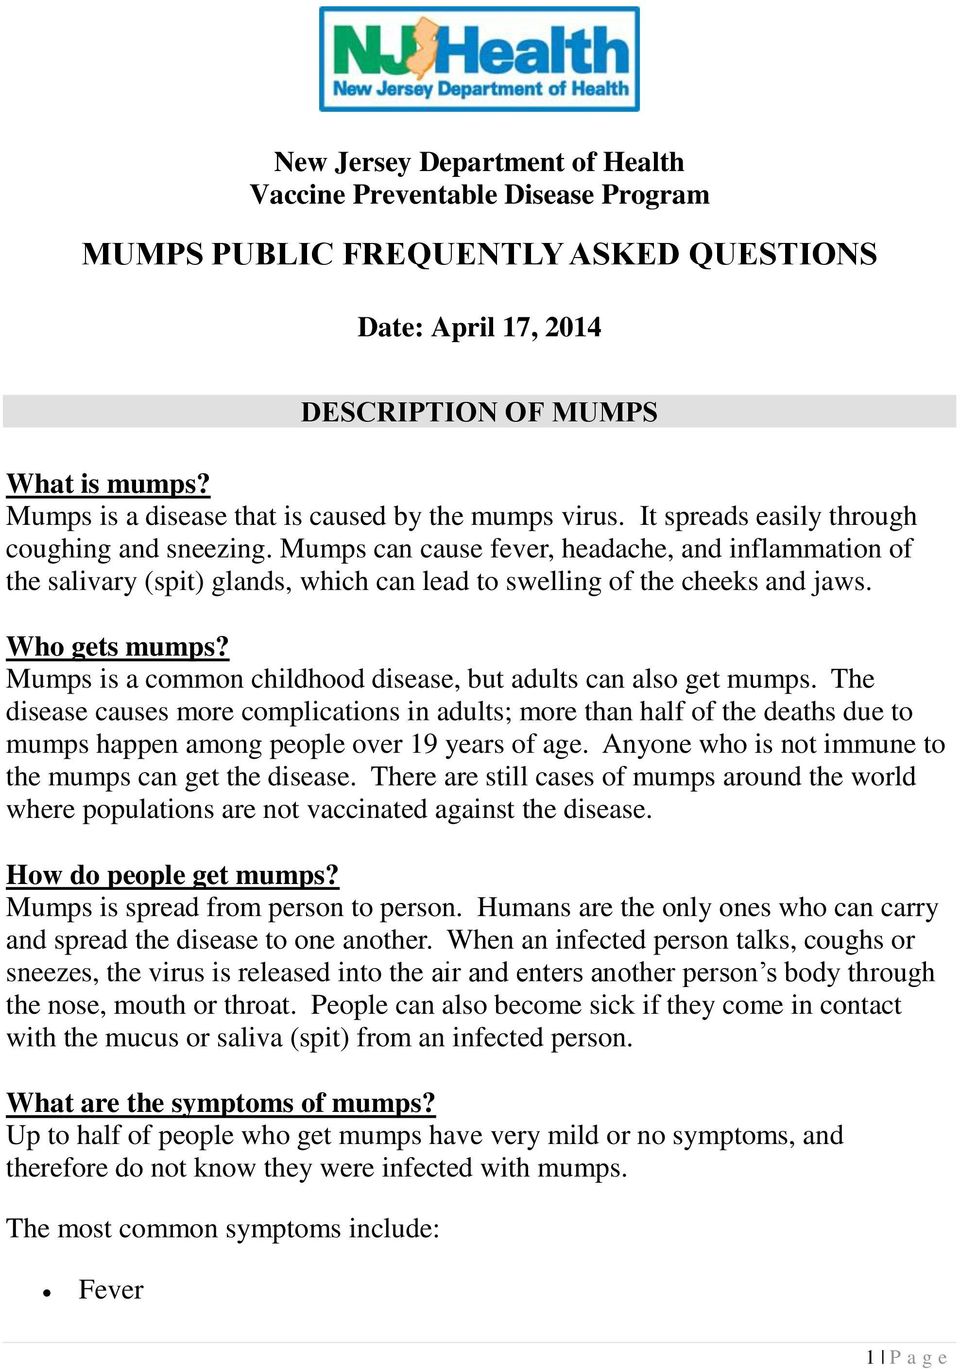 Mumps can cause fever, headache, and inflammation of the salivary (spit) glands, which can lead to swelling of the cheeks and jaws. Who gets mumps?